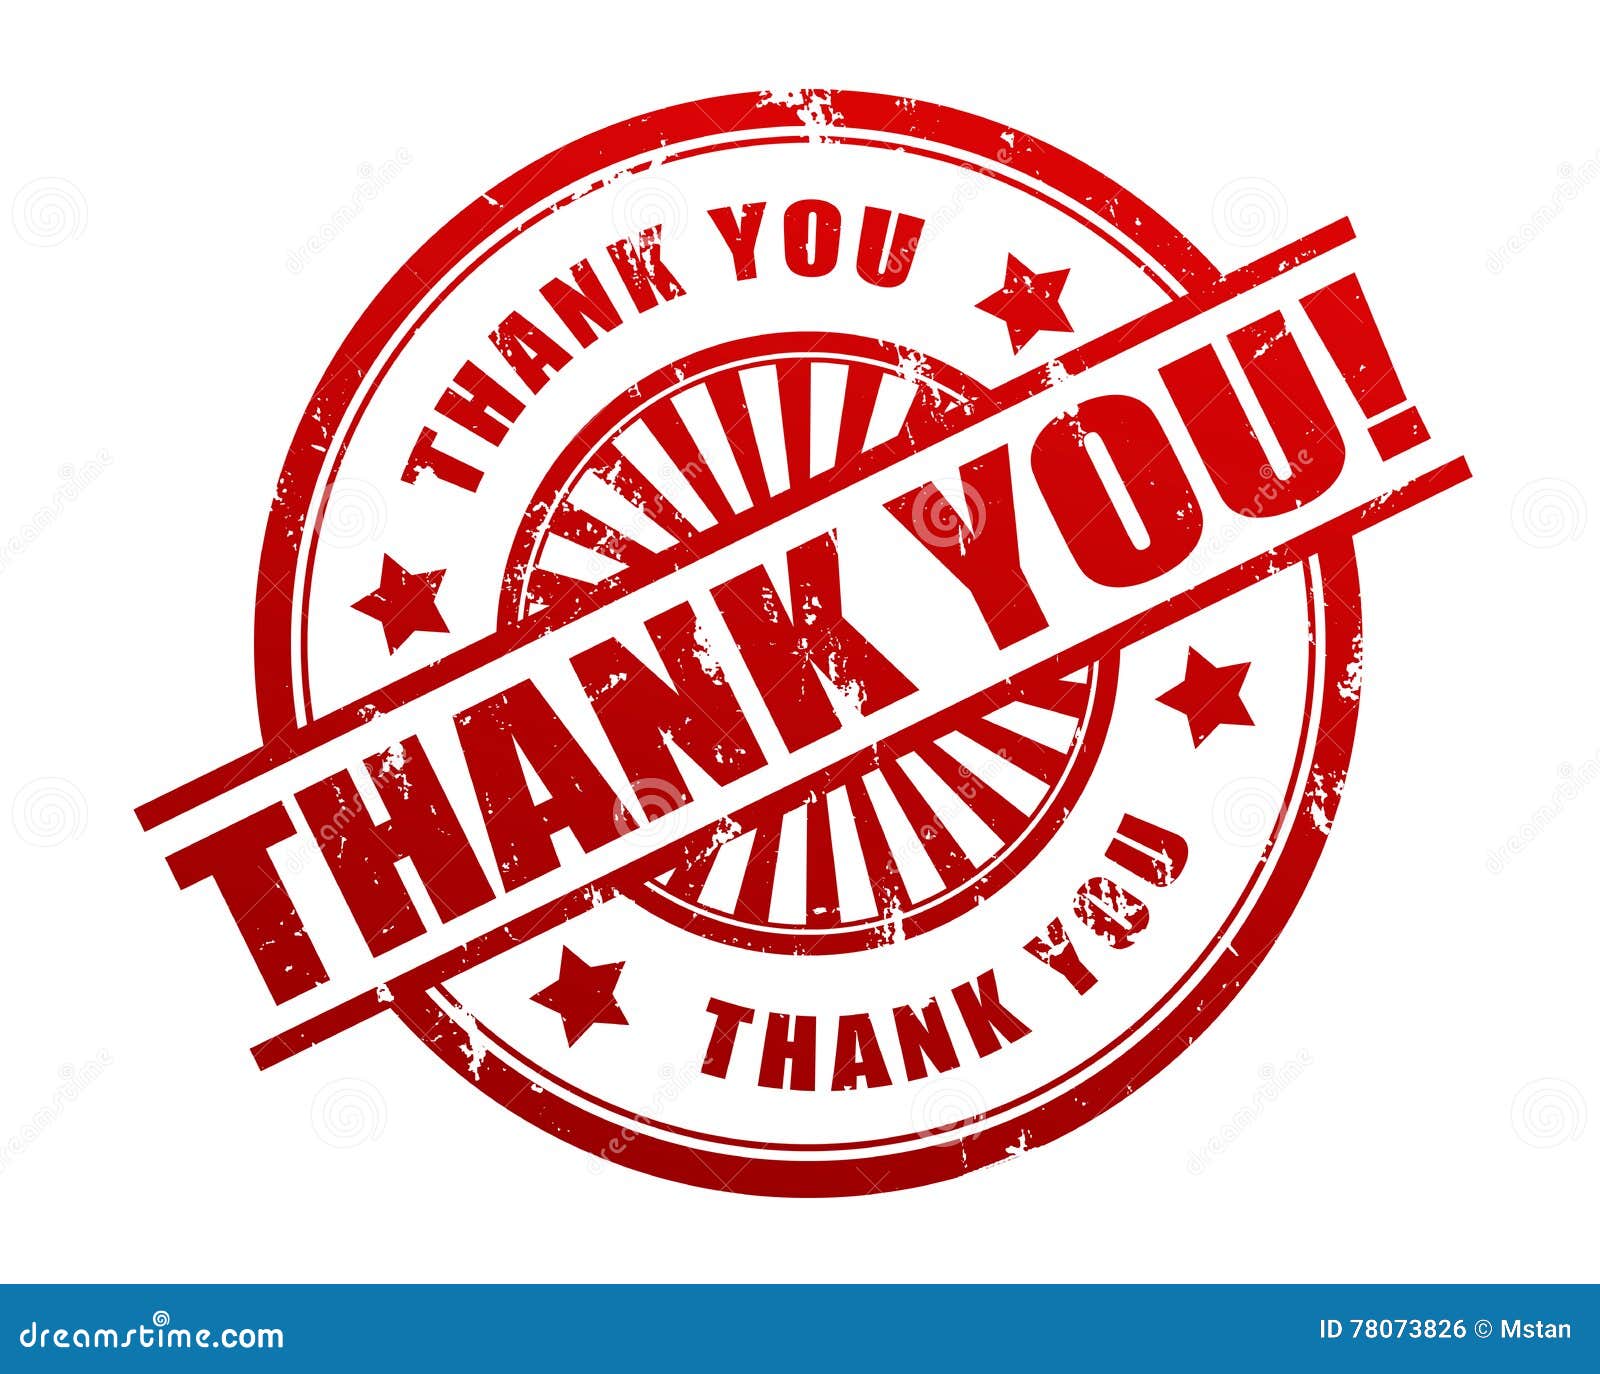 Thank you stamp stock vector. Illustration of background - 21724092